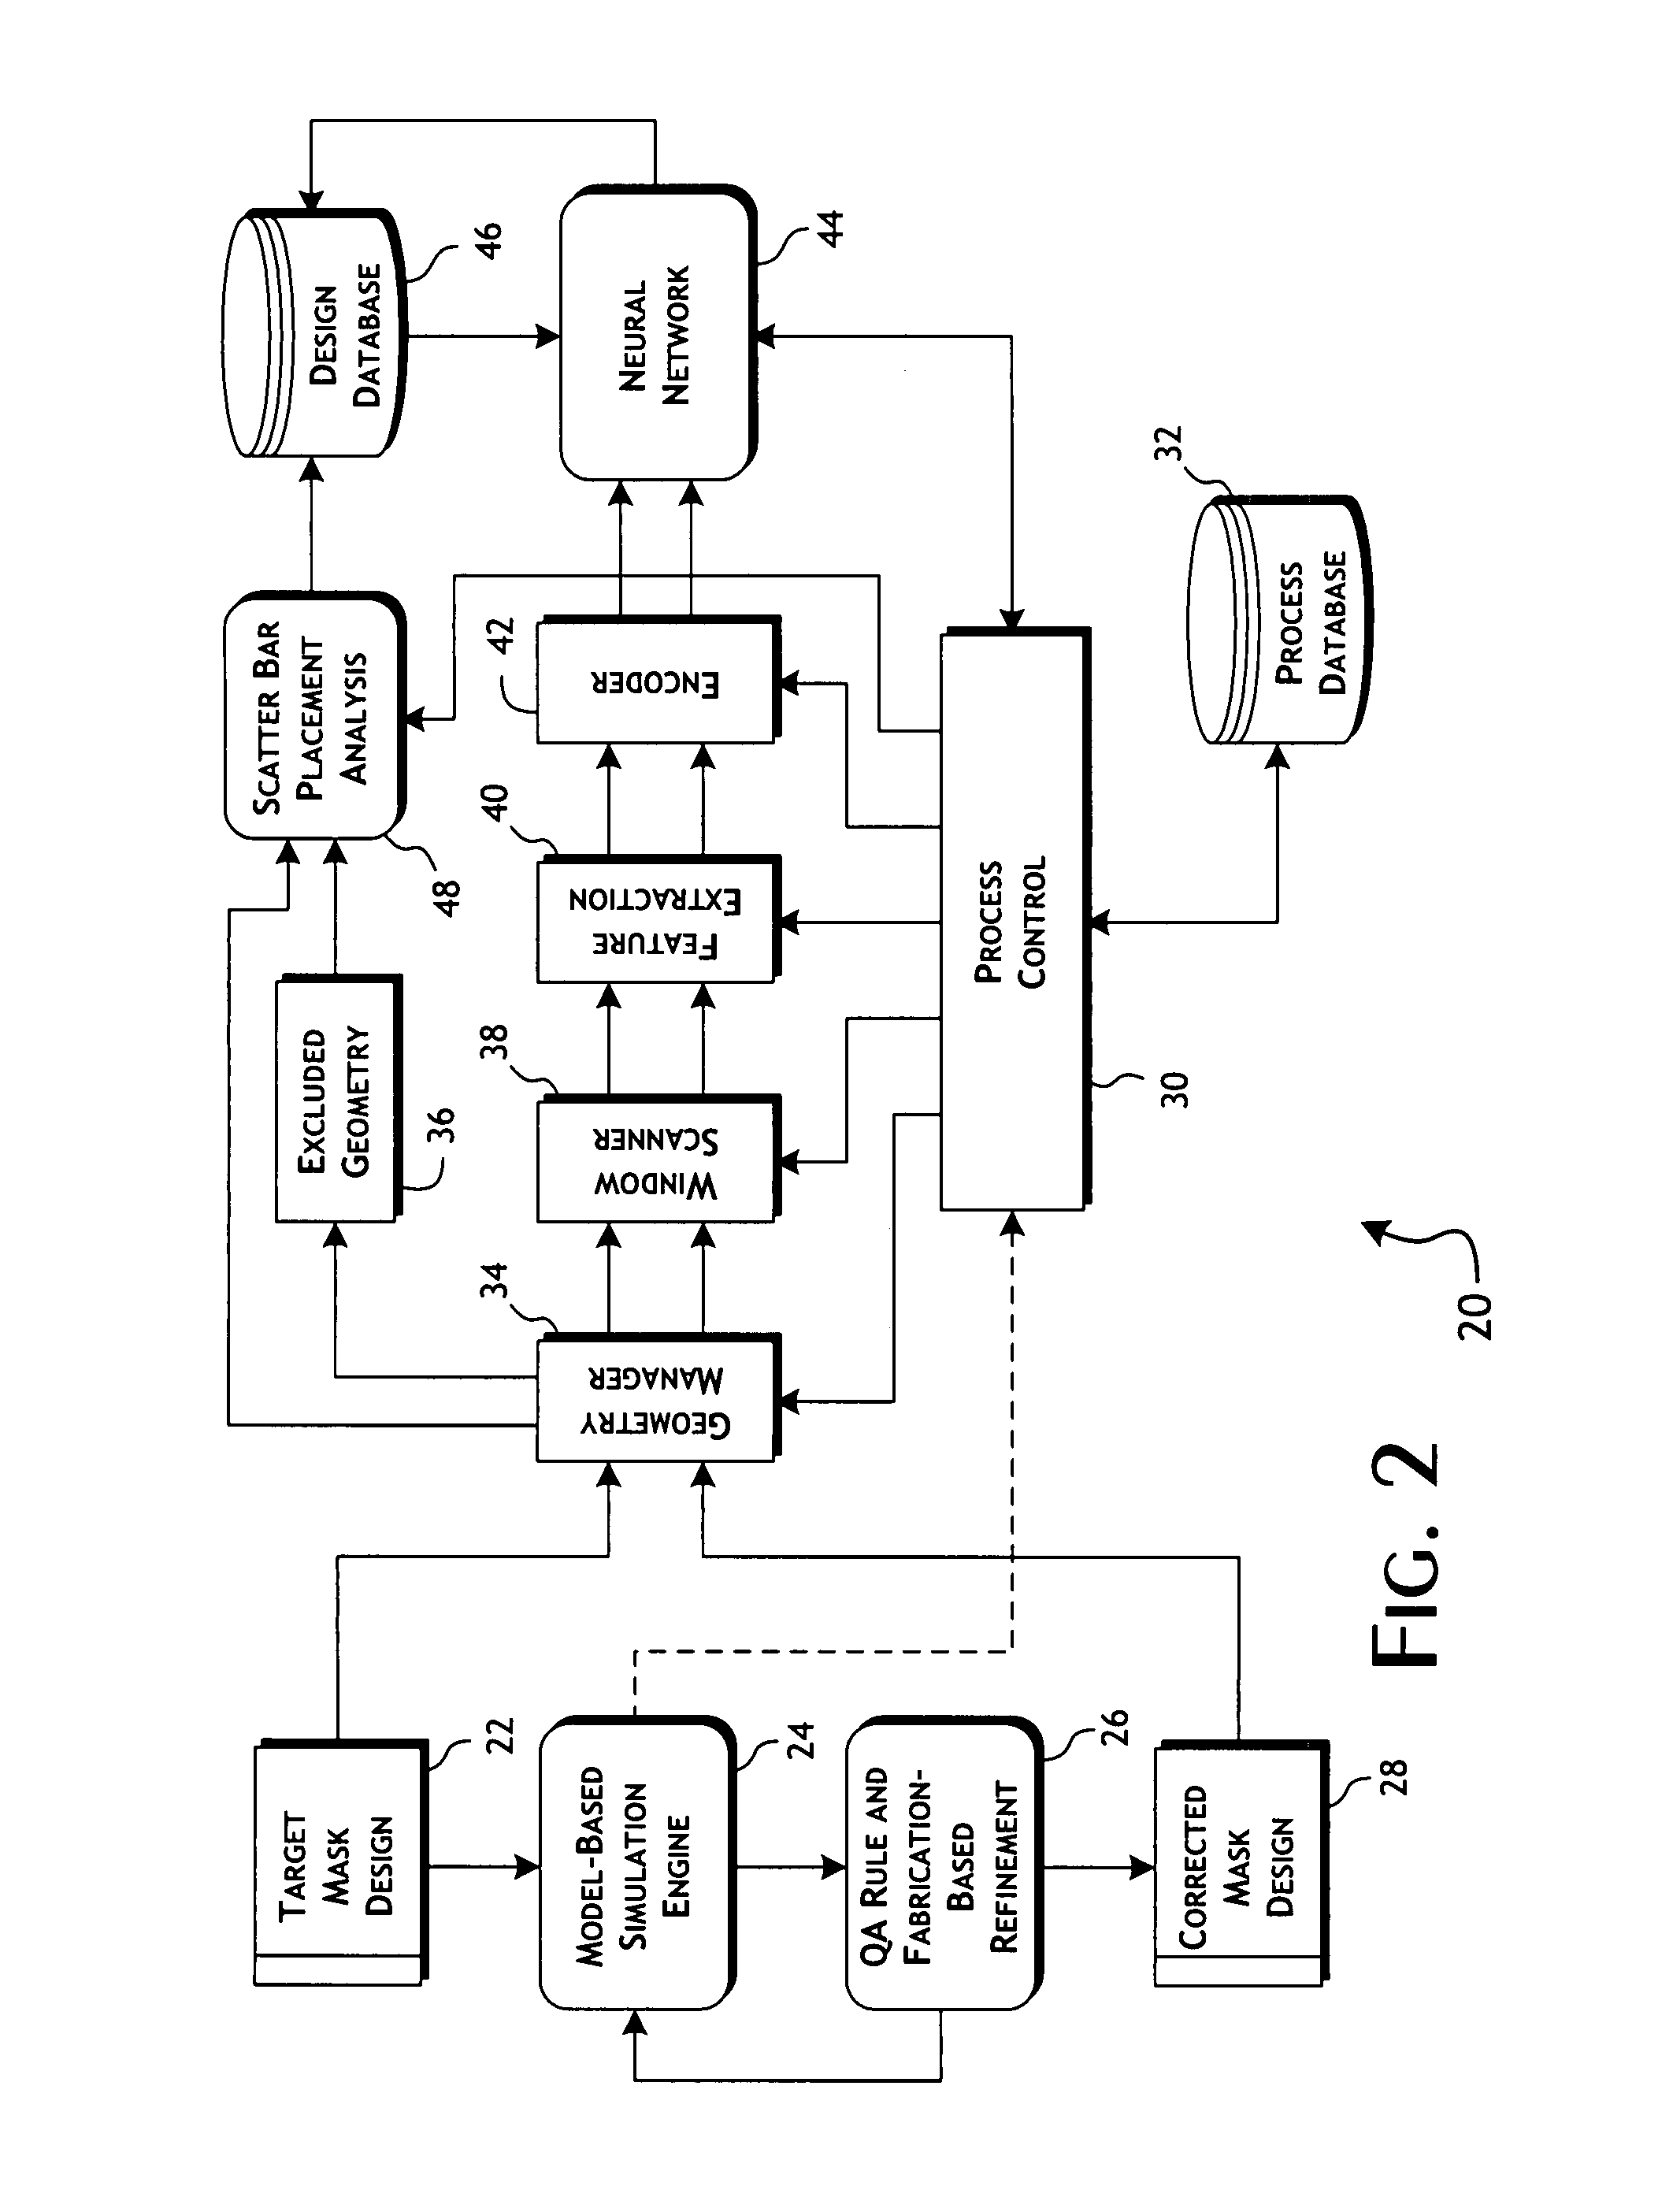 Neural network-based system and methods for performing optical proximity correction